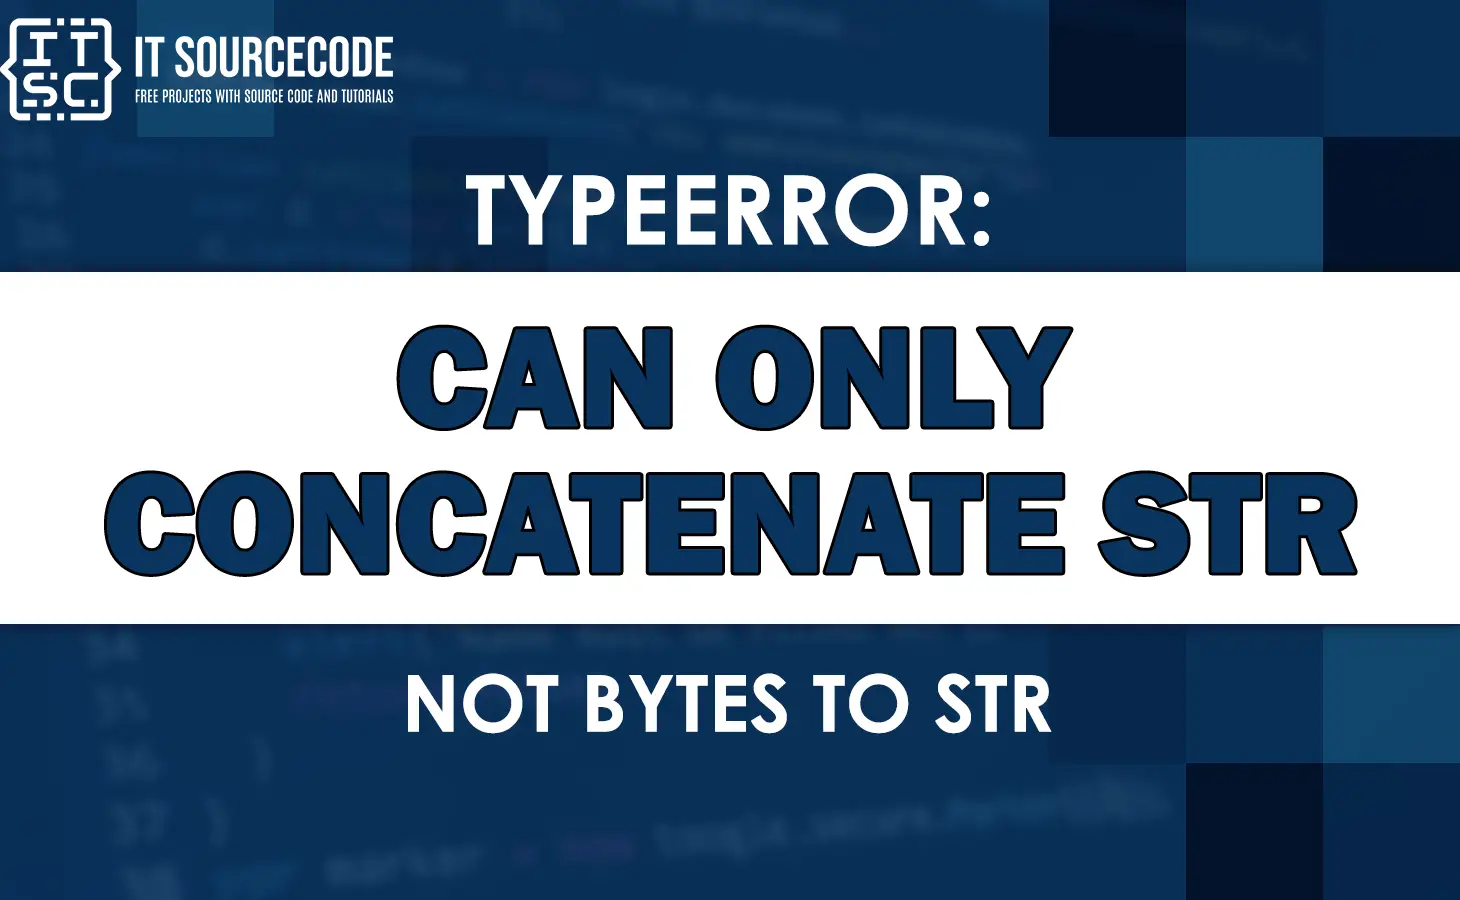 Typeerror: can only concatenate str not bytes to str [FIXED]